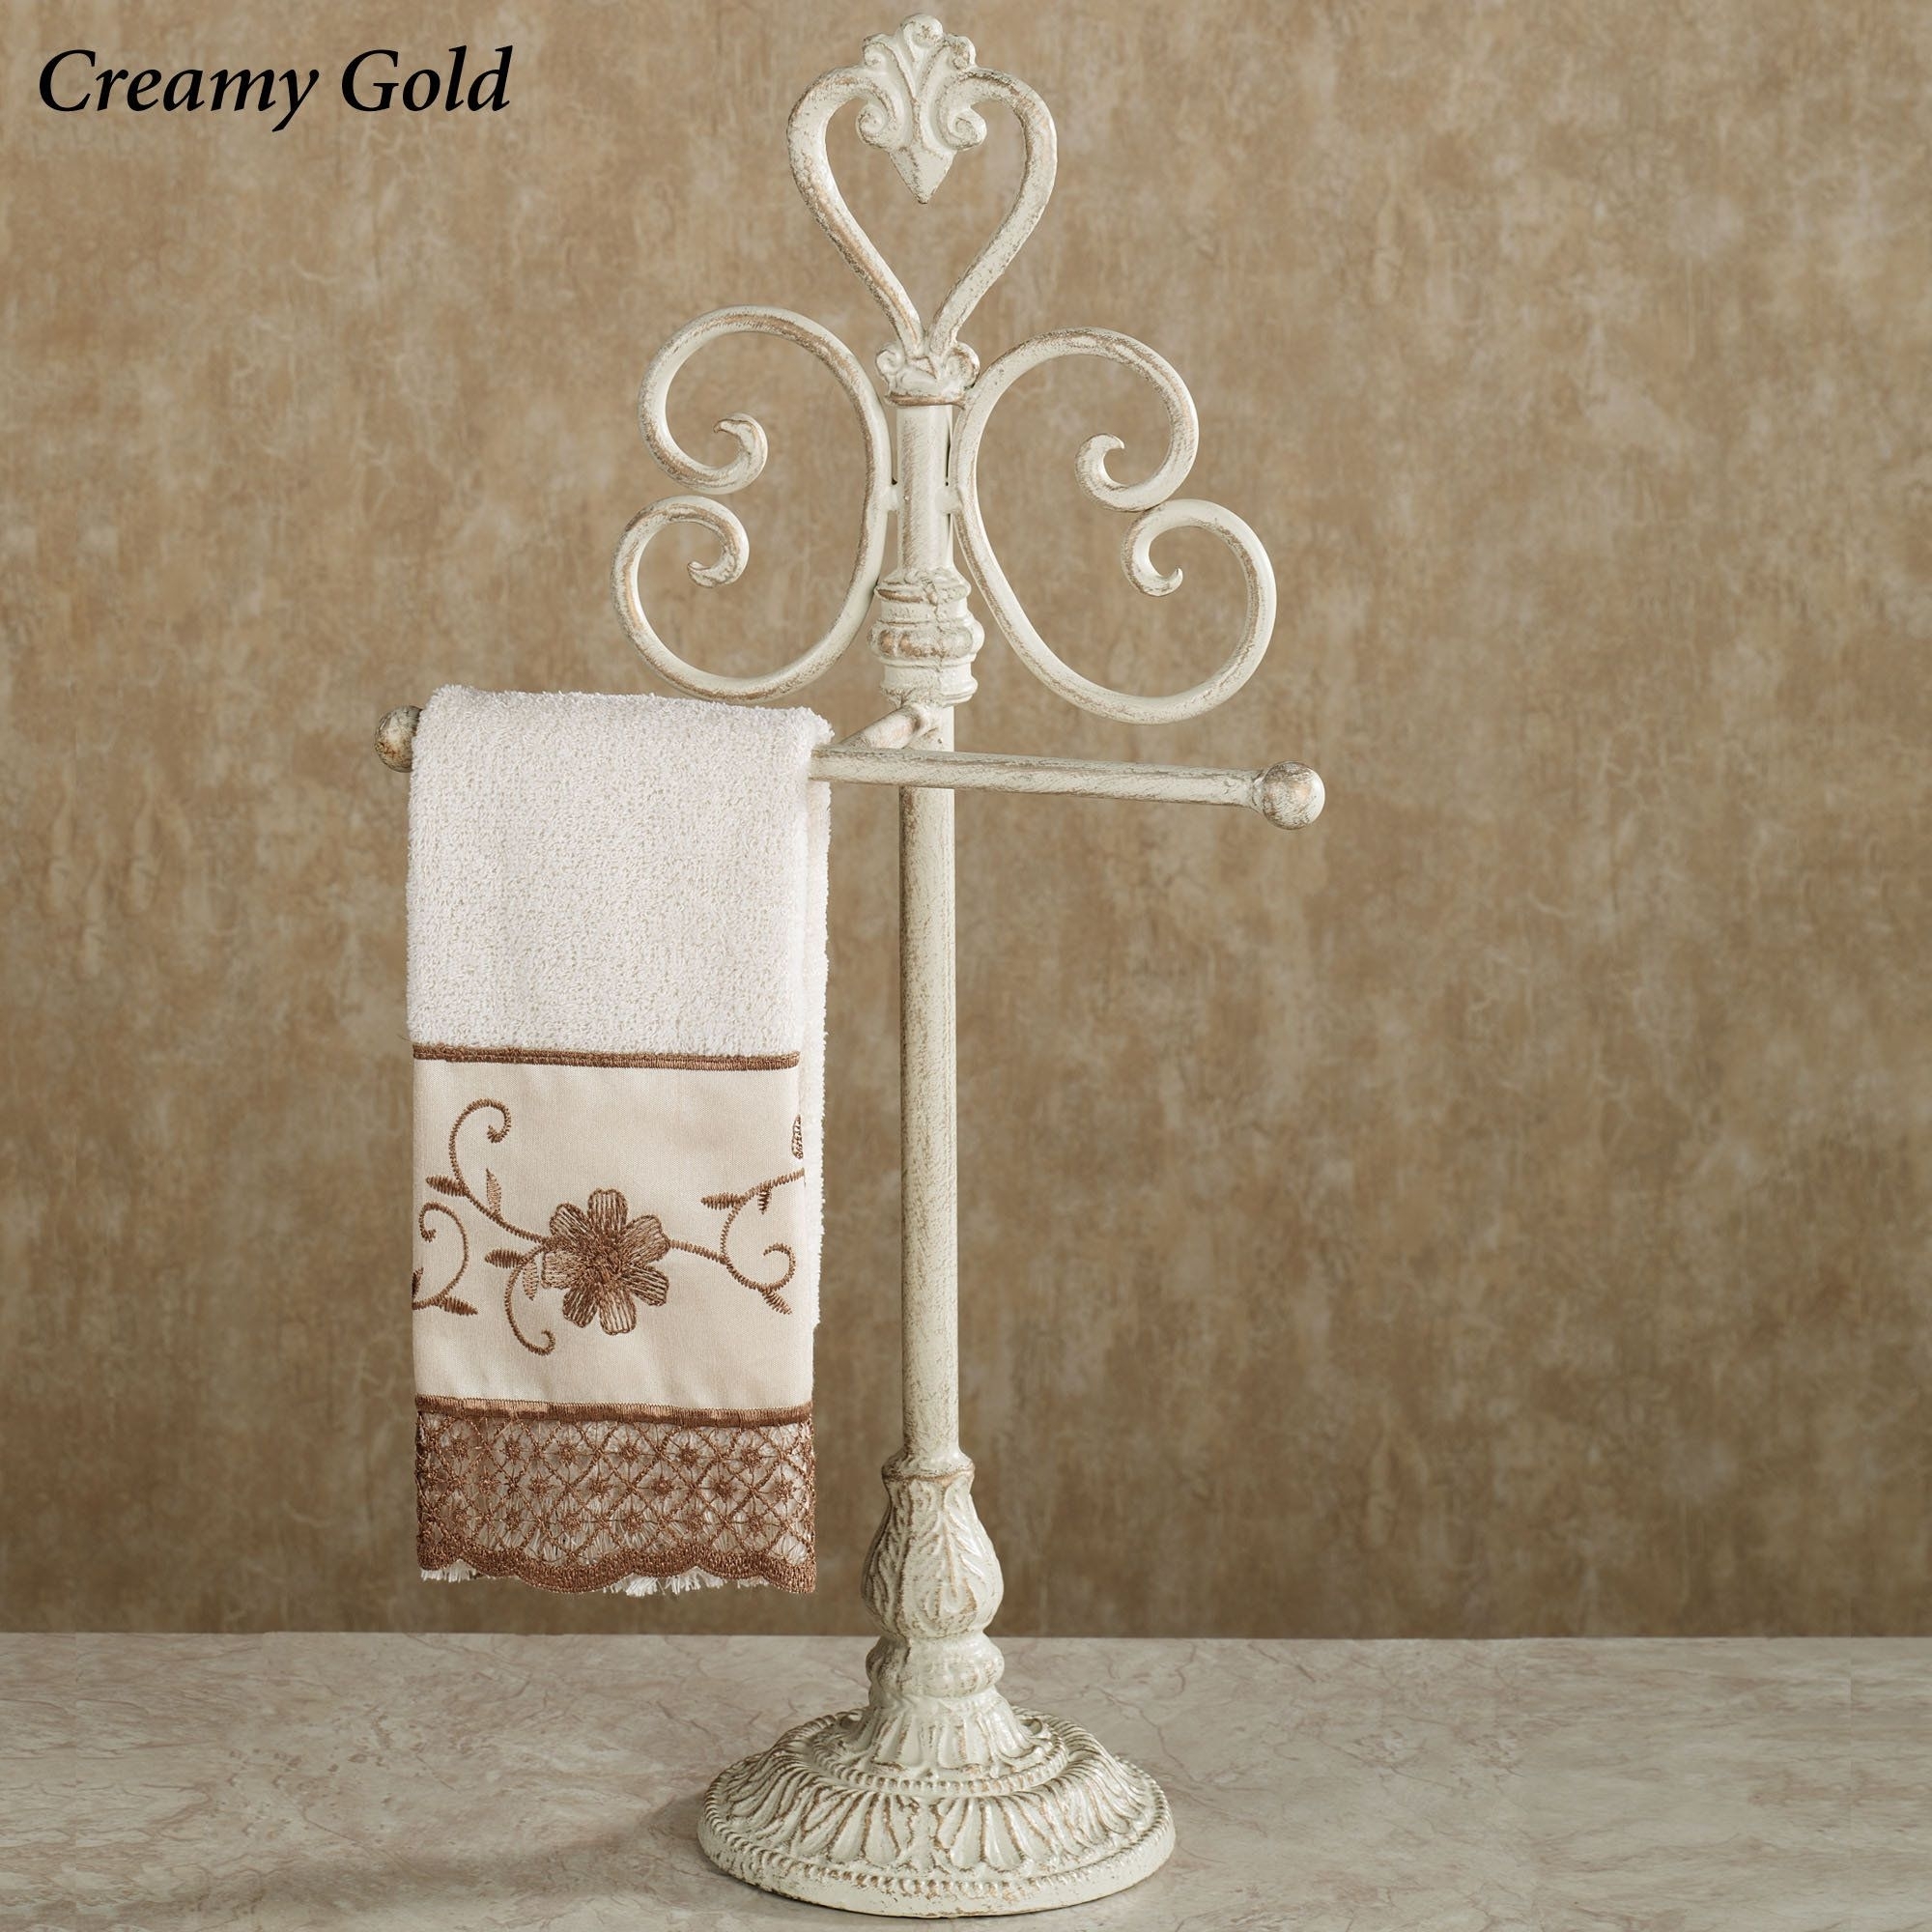 Decorative Small Towel, Towel Holder Stand